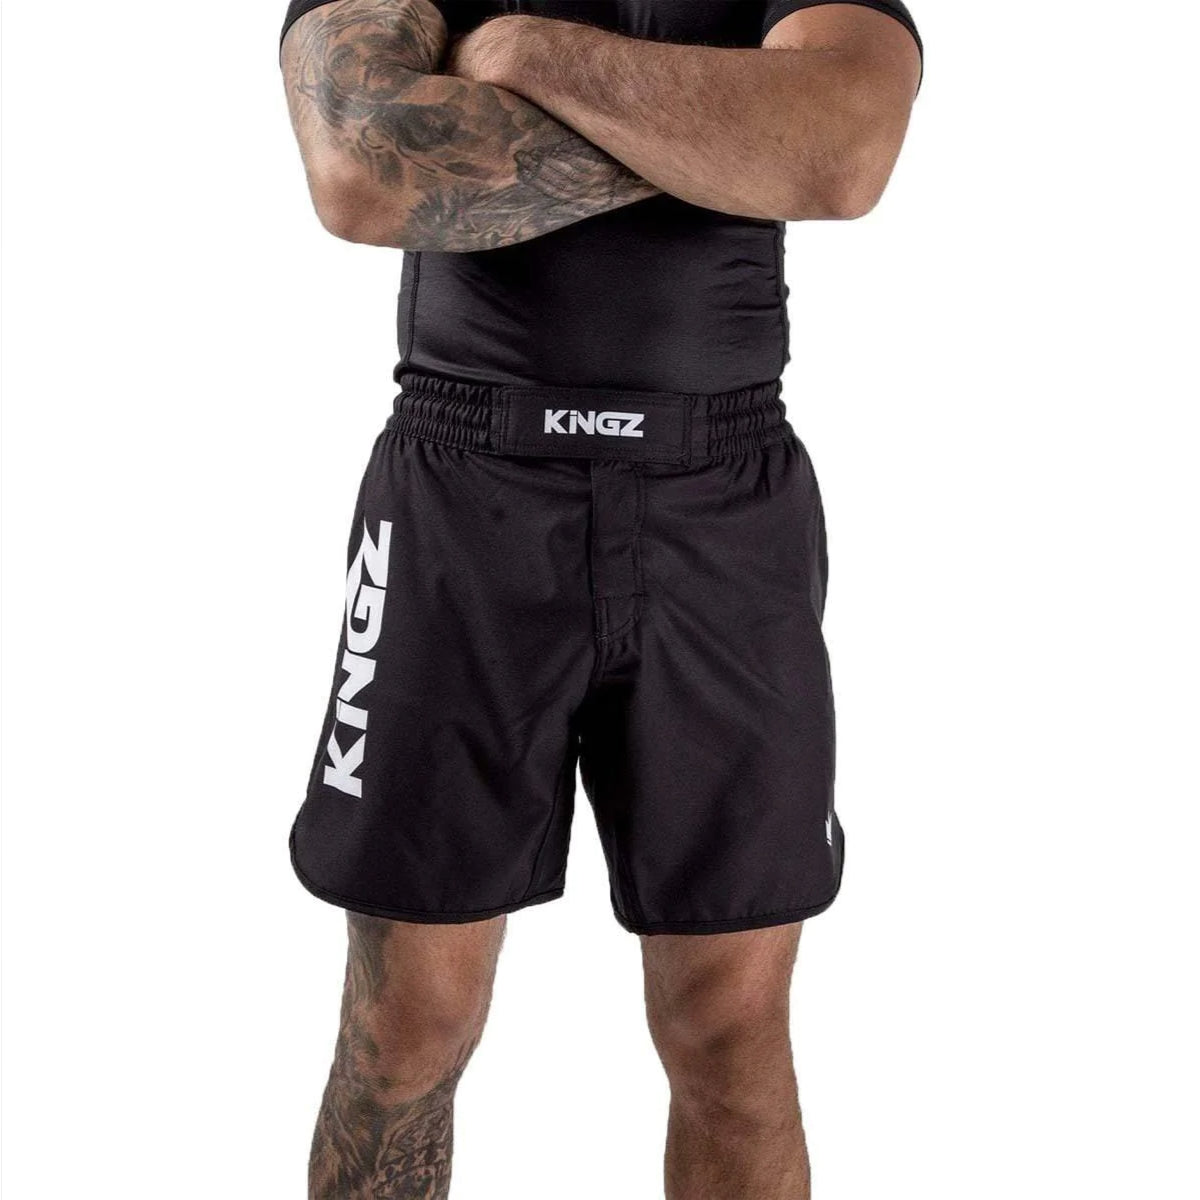 MMA Fight Shorts from Made4Fighters